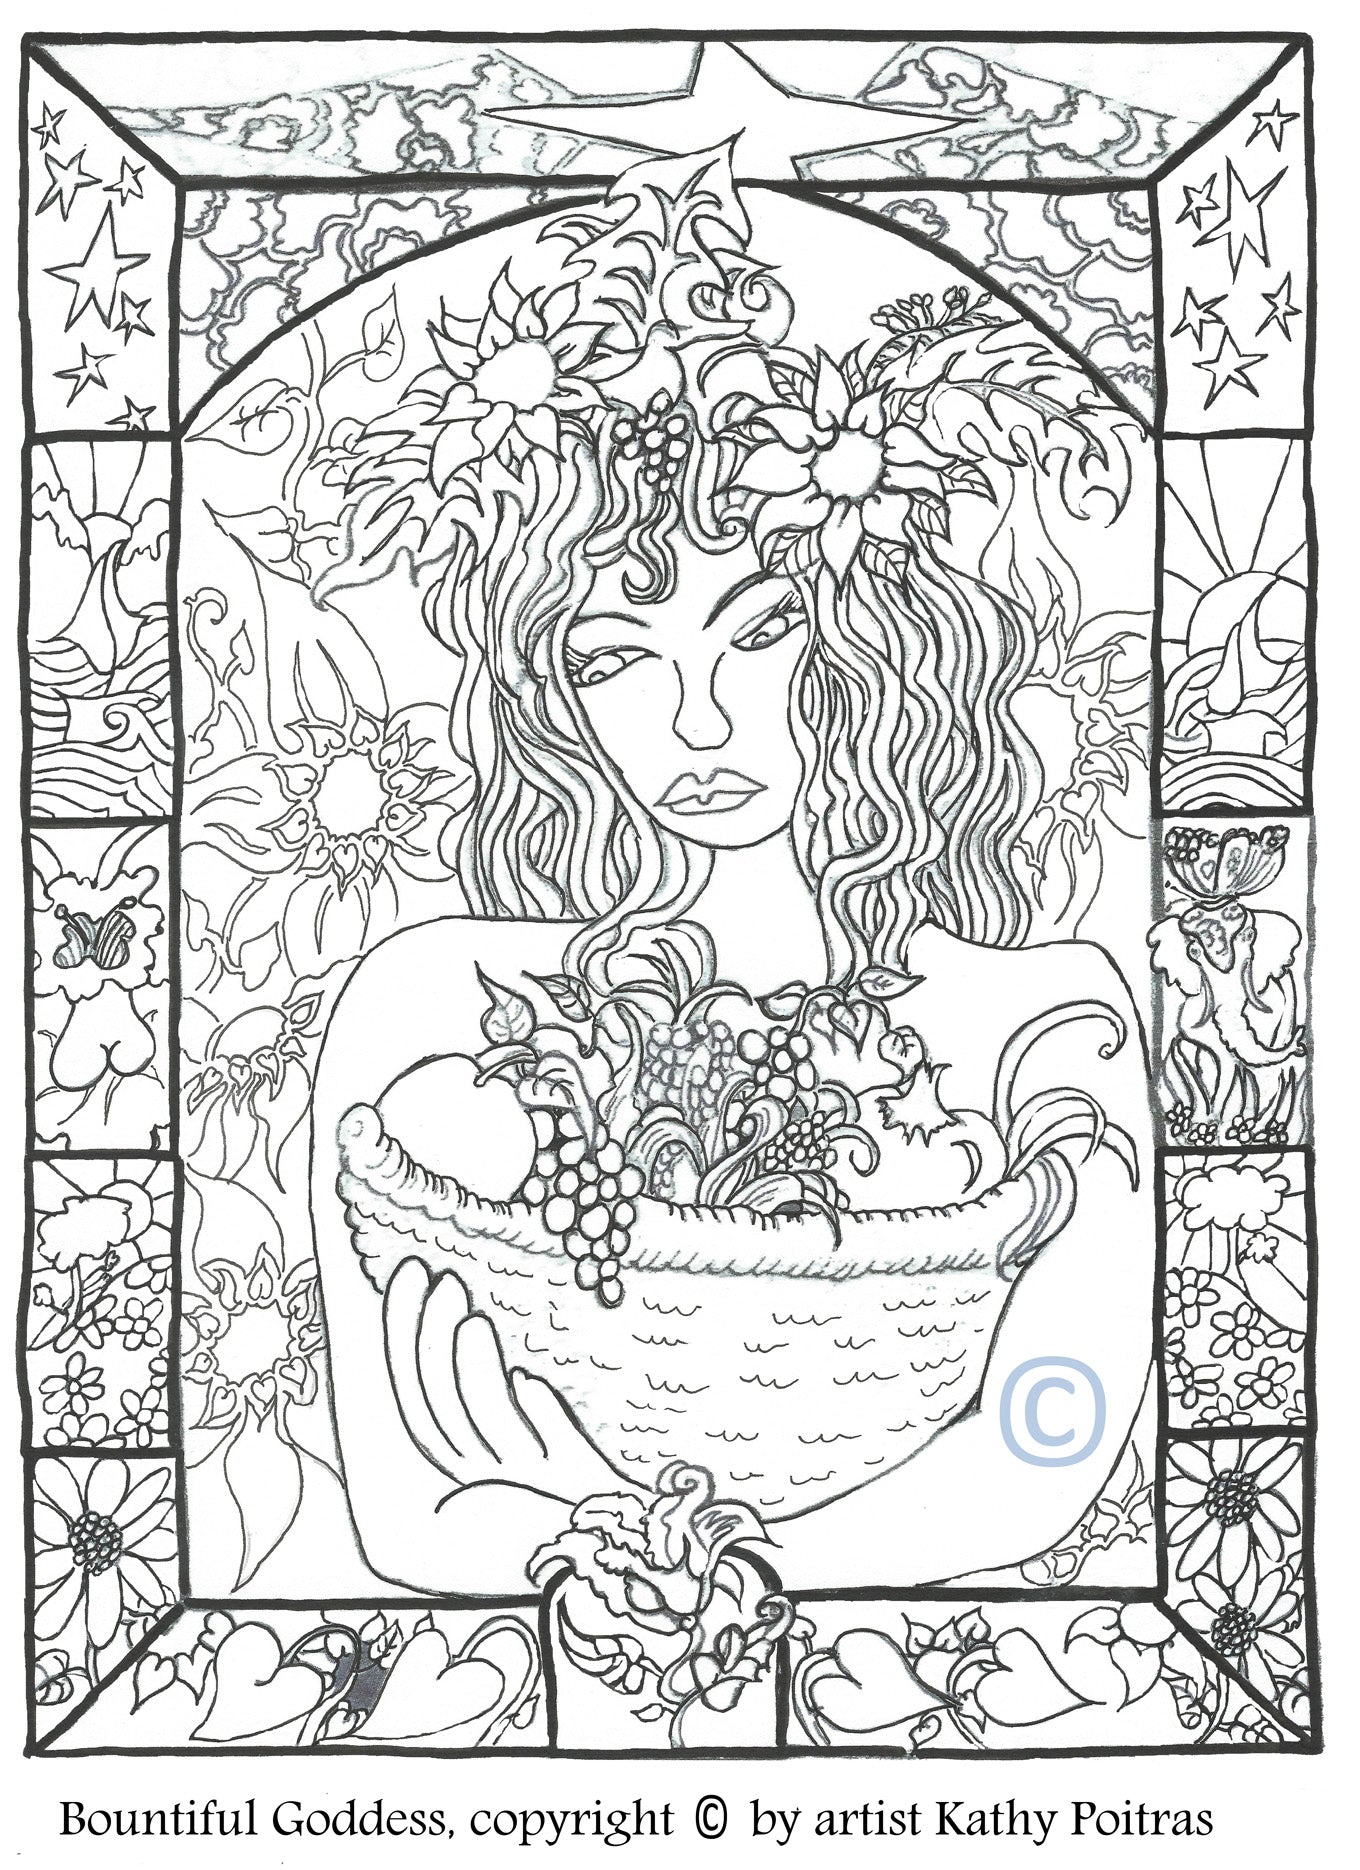 Print your own, color your own Bountiful Goddess